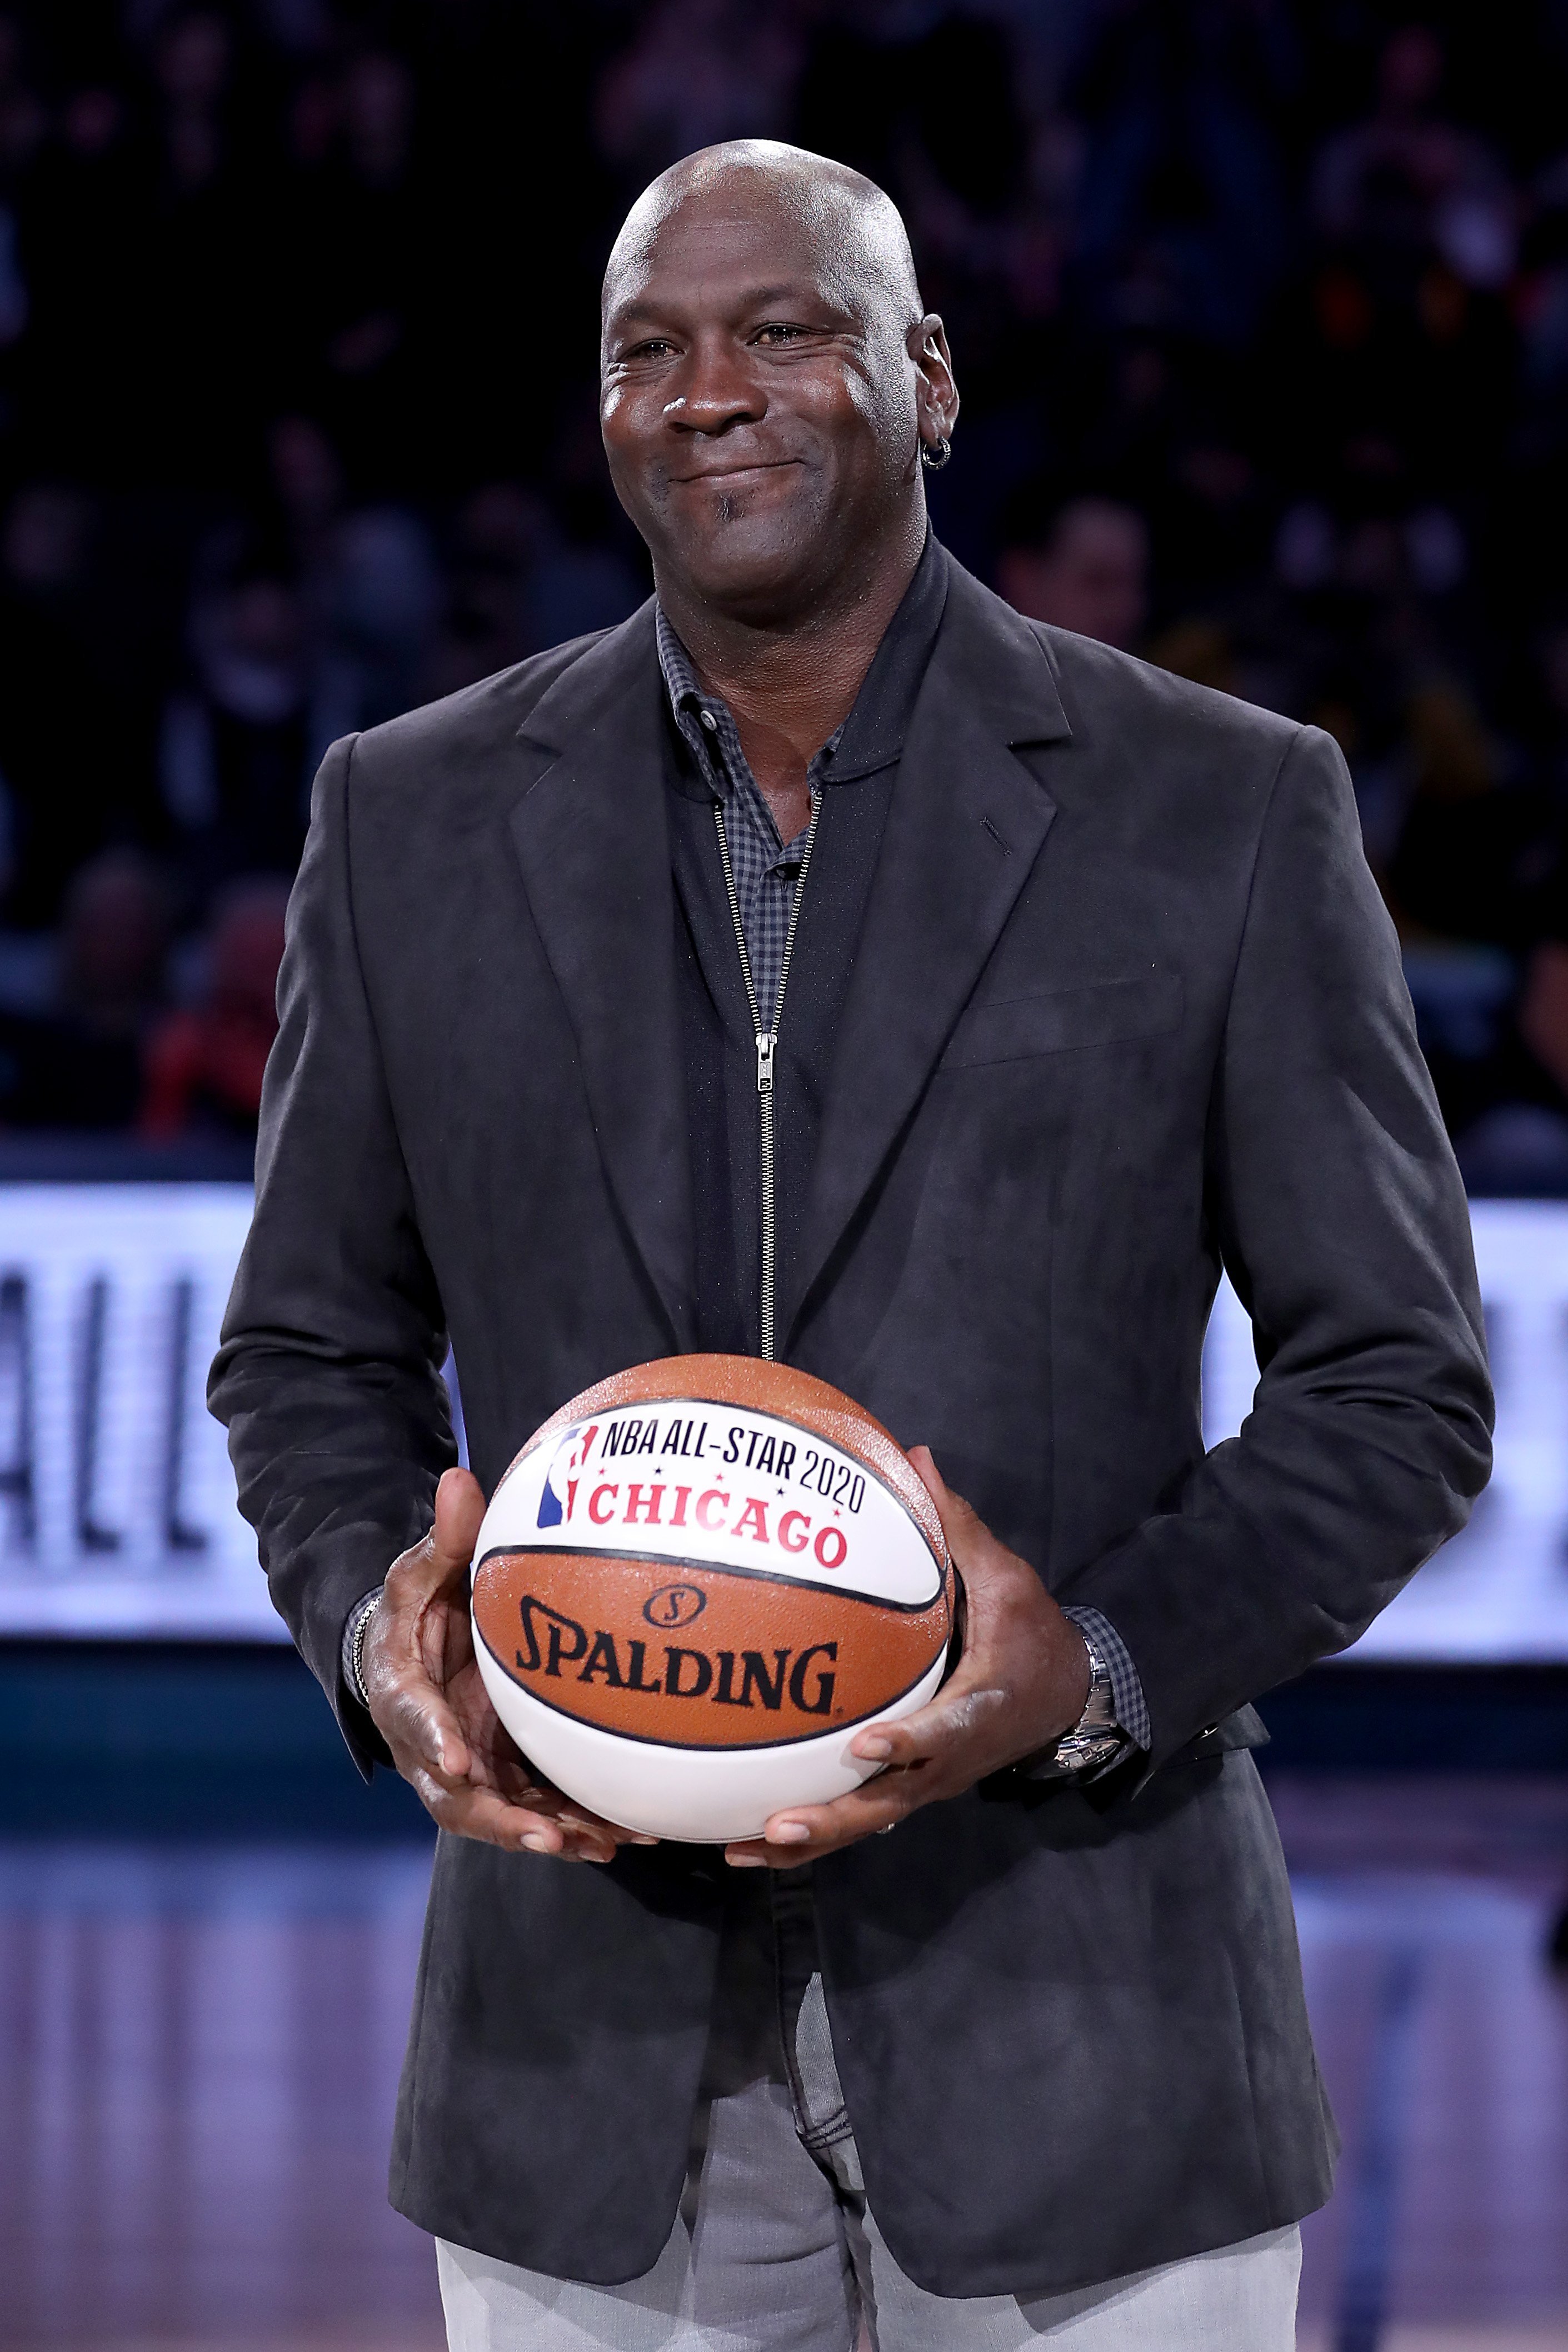 Michael Jordan takes part in a ceremony honoring the 2020 NBA All-Star game on Feb. 17, 2019 in North Carolina | Photo: Getty Images